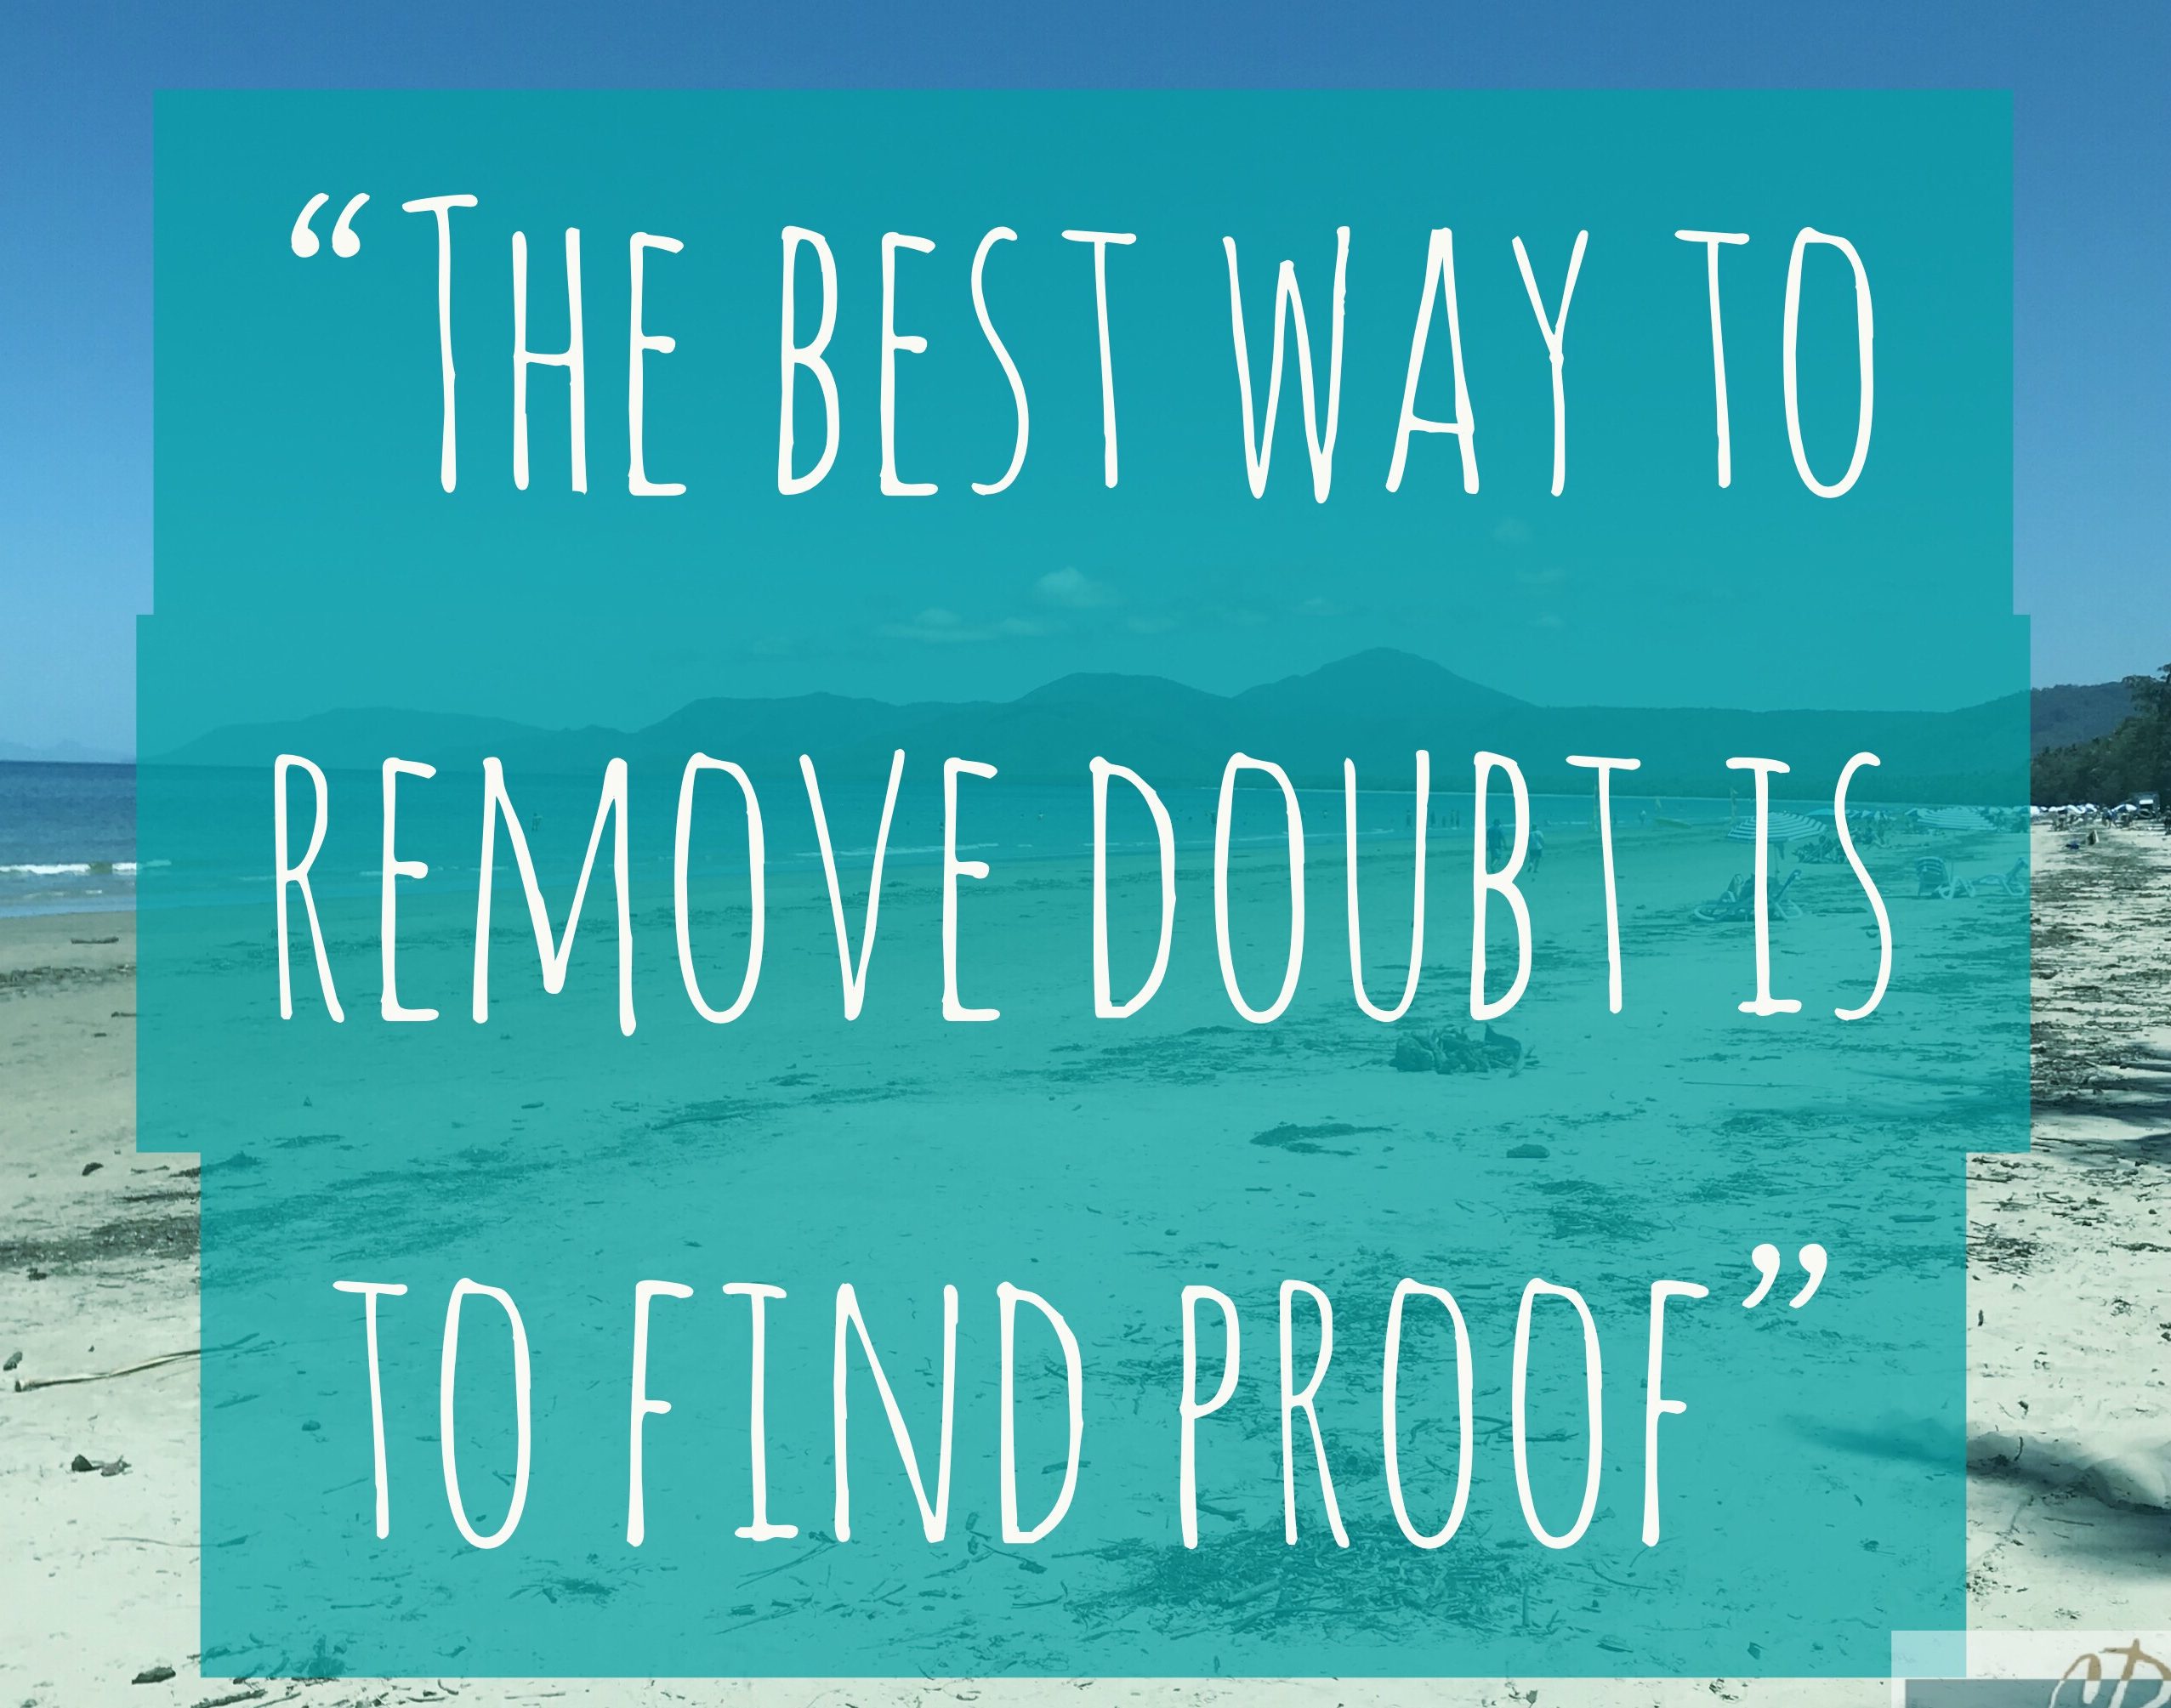 The Best Way To Remove Doubt Is To Find Proof (Confidence Has To Be Earned)